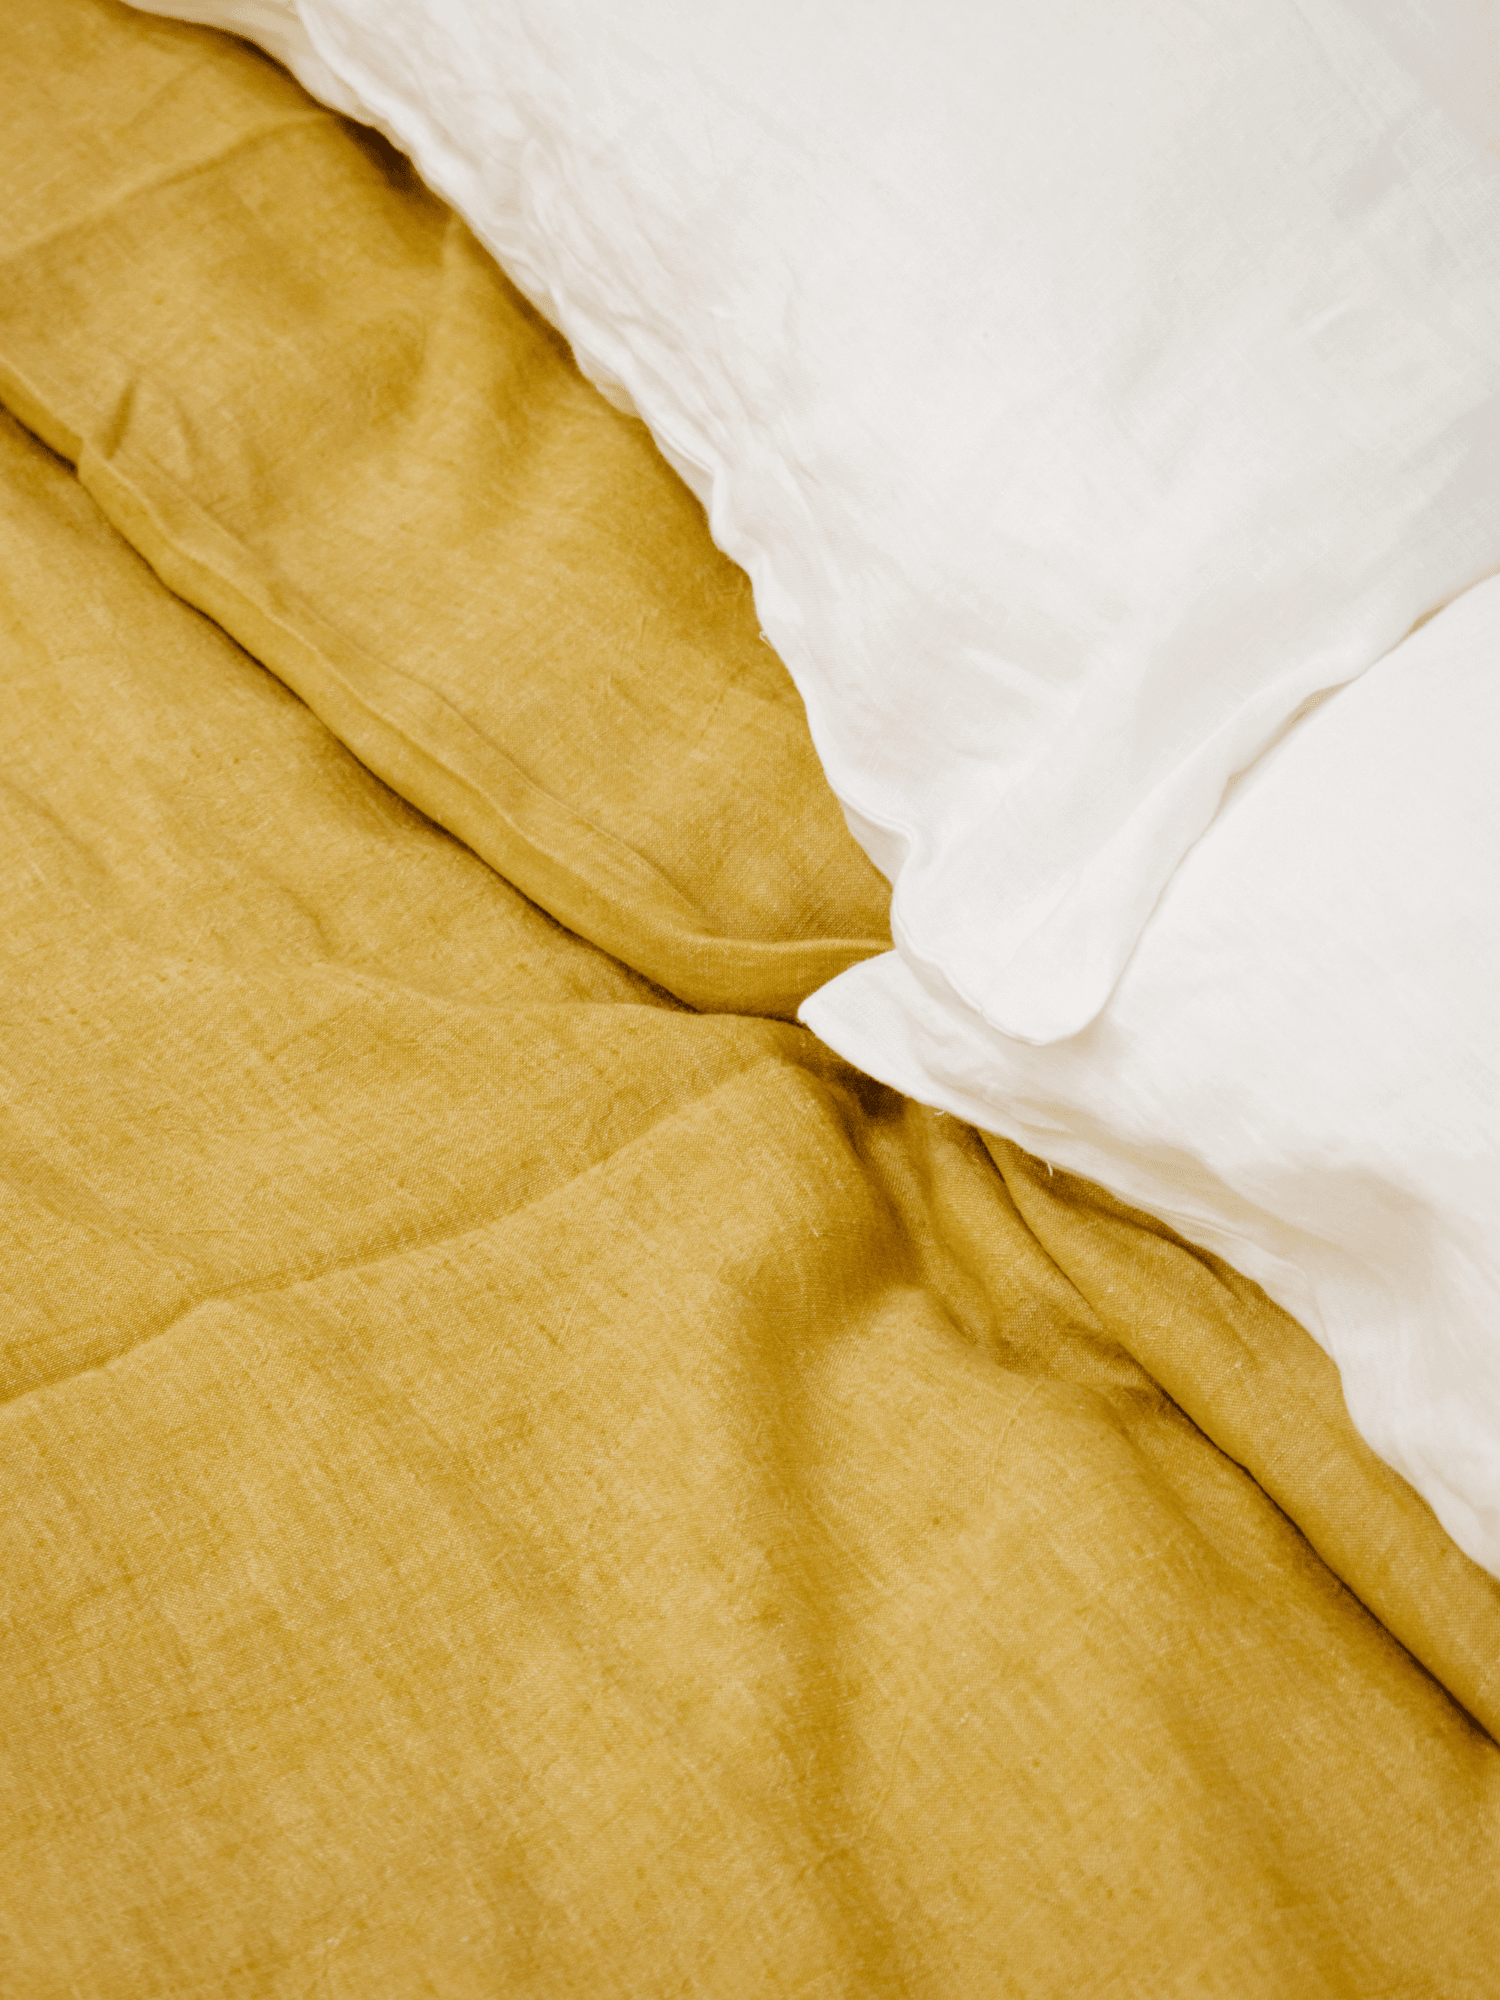 Family Soft Linen Bedding Set of Turmeric Yellow Color (includes 7 items) - Bedroom, Family Bedding Set, label, Linen bedding set - FlaxLin Eco Textiles